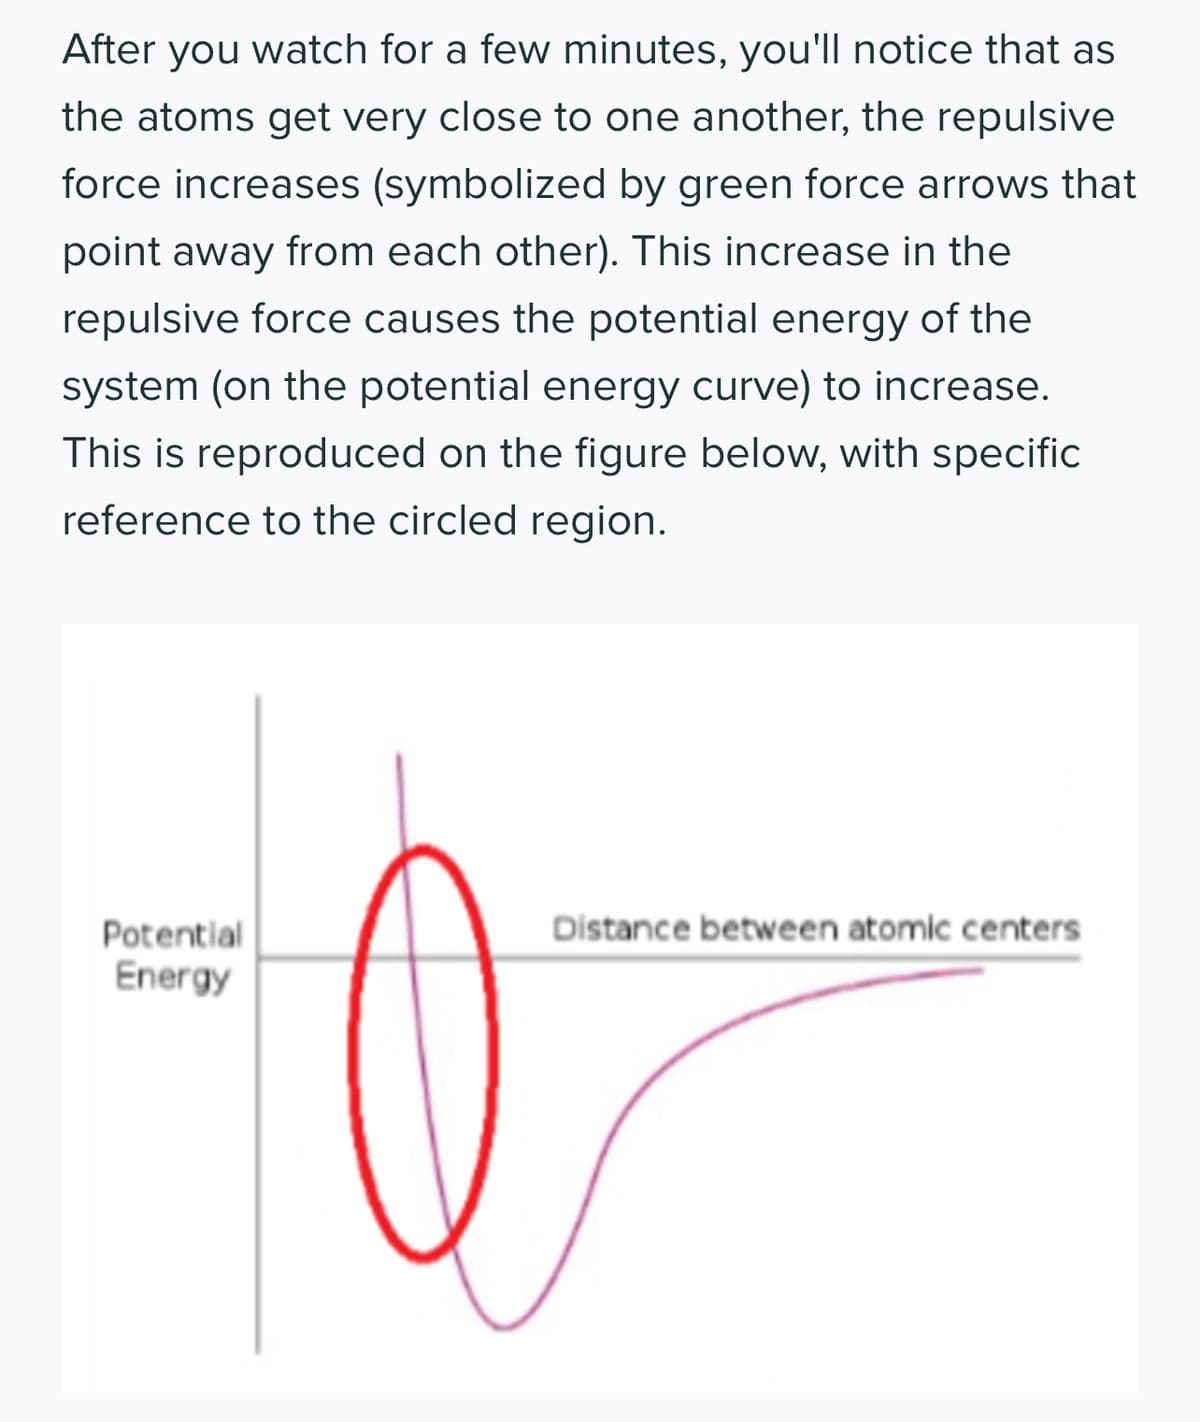 After you watch for a few minutes, you'll notice that as
the atoms get very close to one another, the repulsive
force increases (symbolized by green force arrows that
point away from each other). This increase in the
repulsive force causes the potential energy of the
system (on the potential energy curve) to increase.
This is reproduced on the figure below, with specific
reference to the circled region.
Potential
Energy
Distance between atomic centers